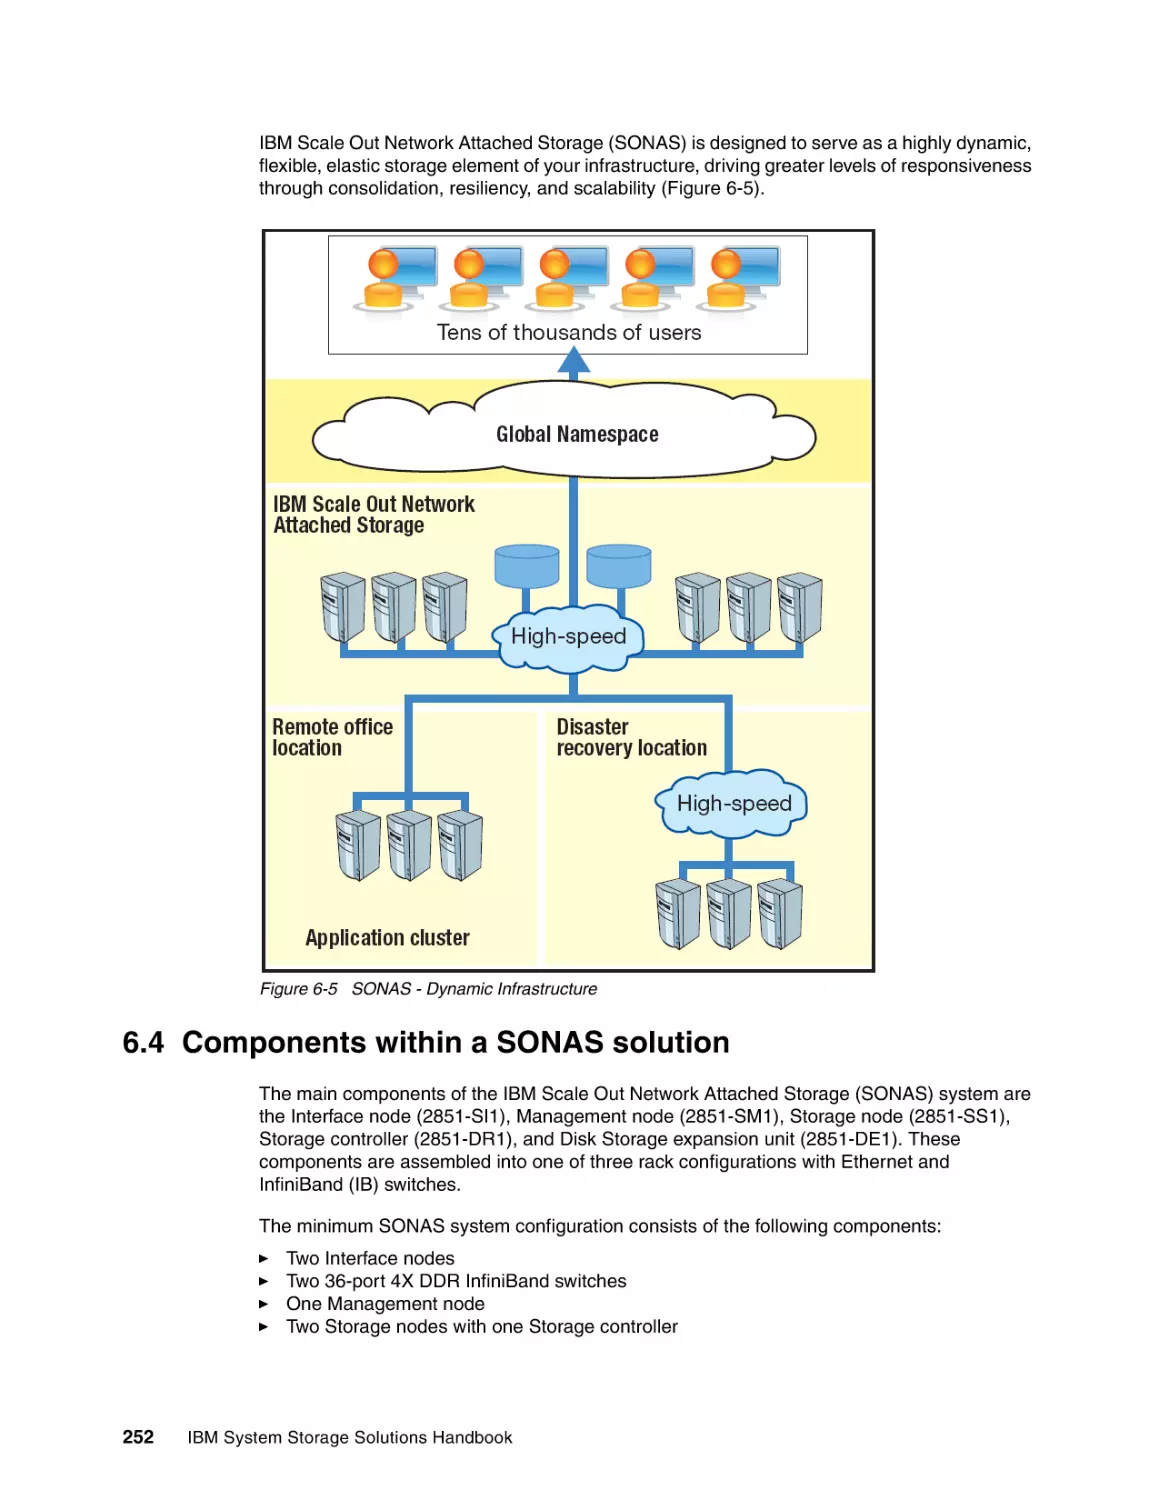 6.4 Components within a SONAS solution